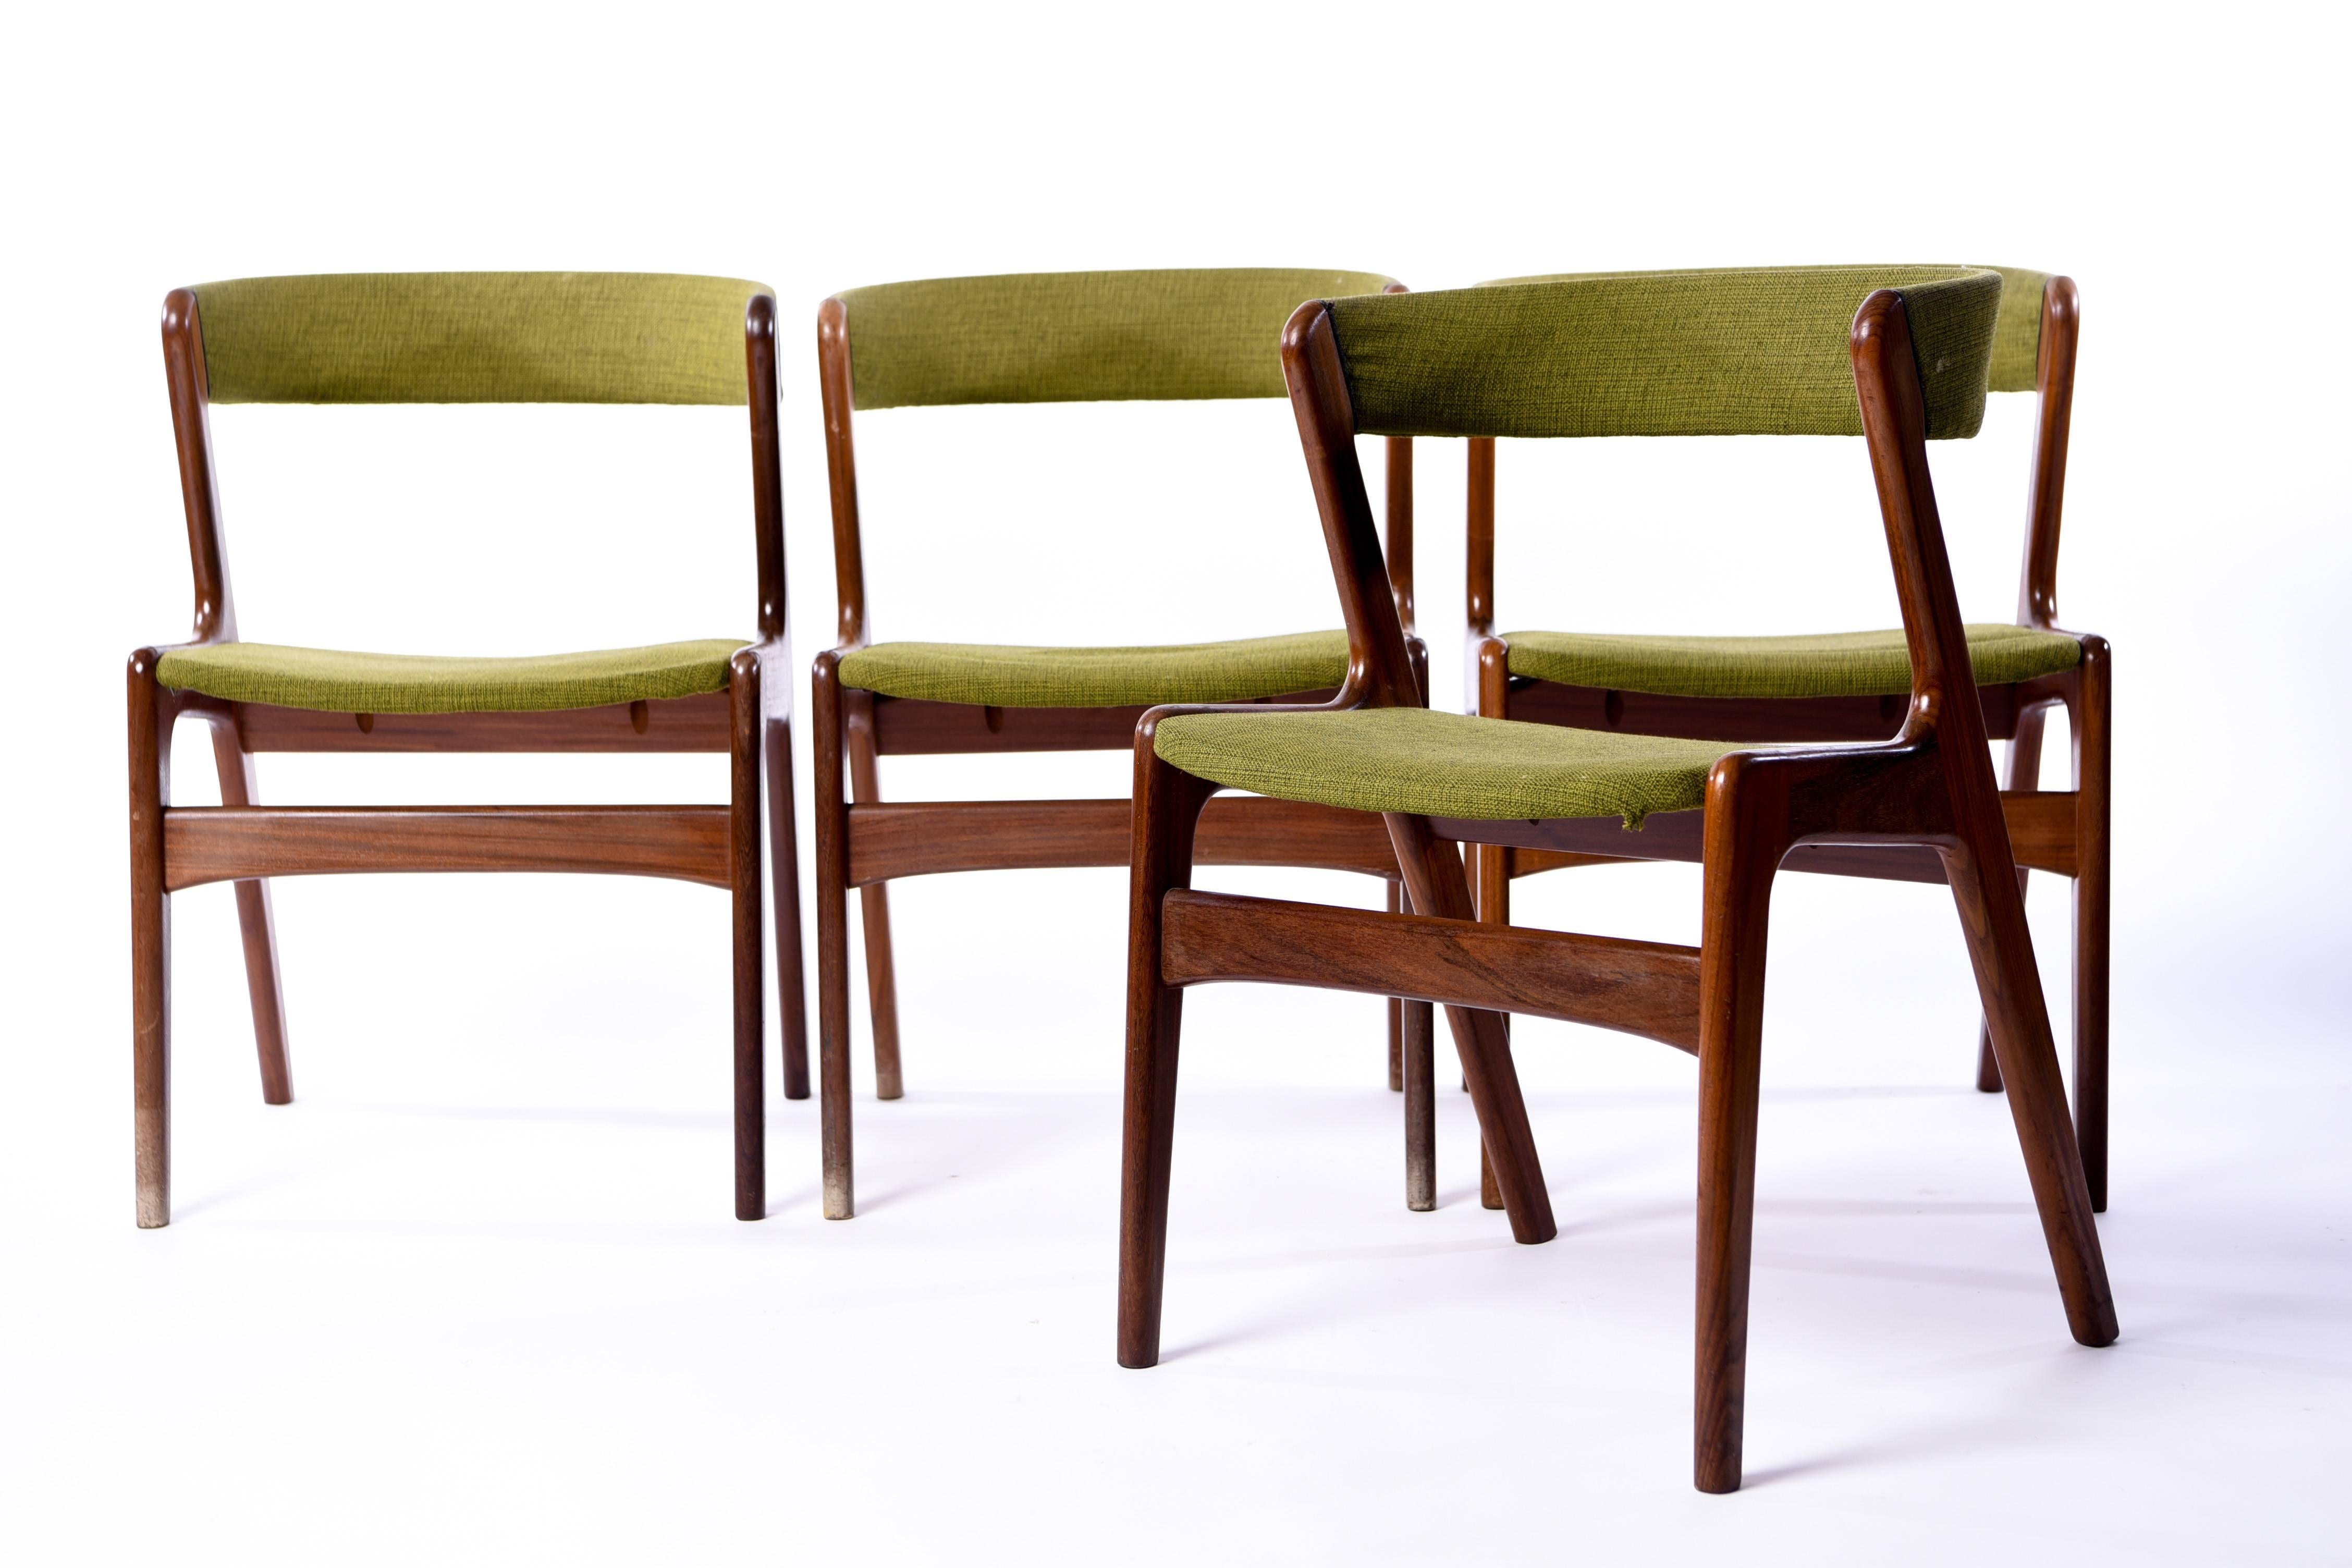 This set of four teak side or dining chairs was designed by Danish architect Oman Jr. in the 1960s. Similar design to his contemporary designer Kai Kristiansen.